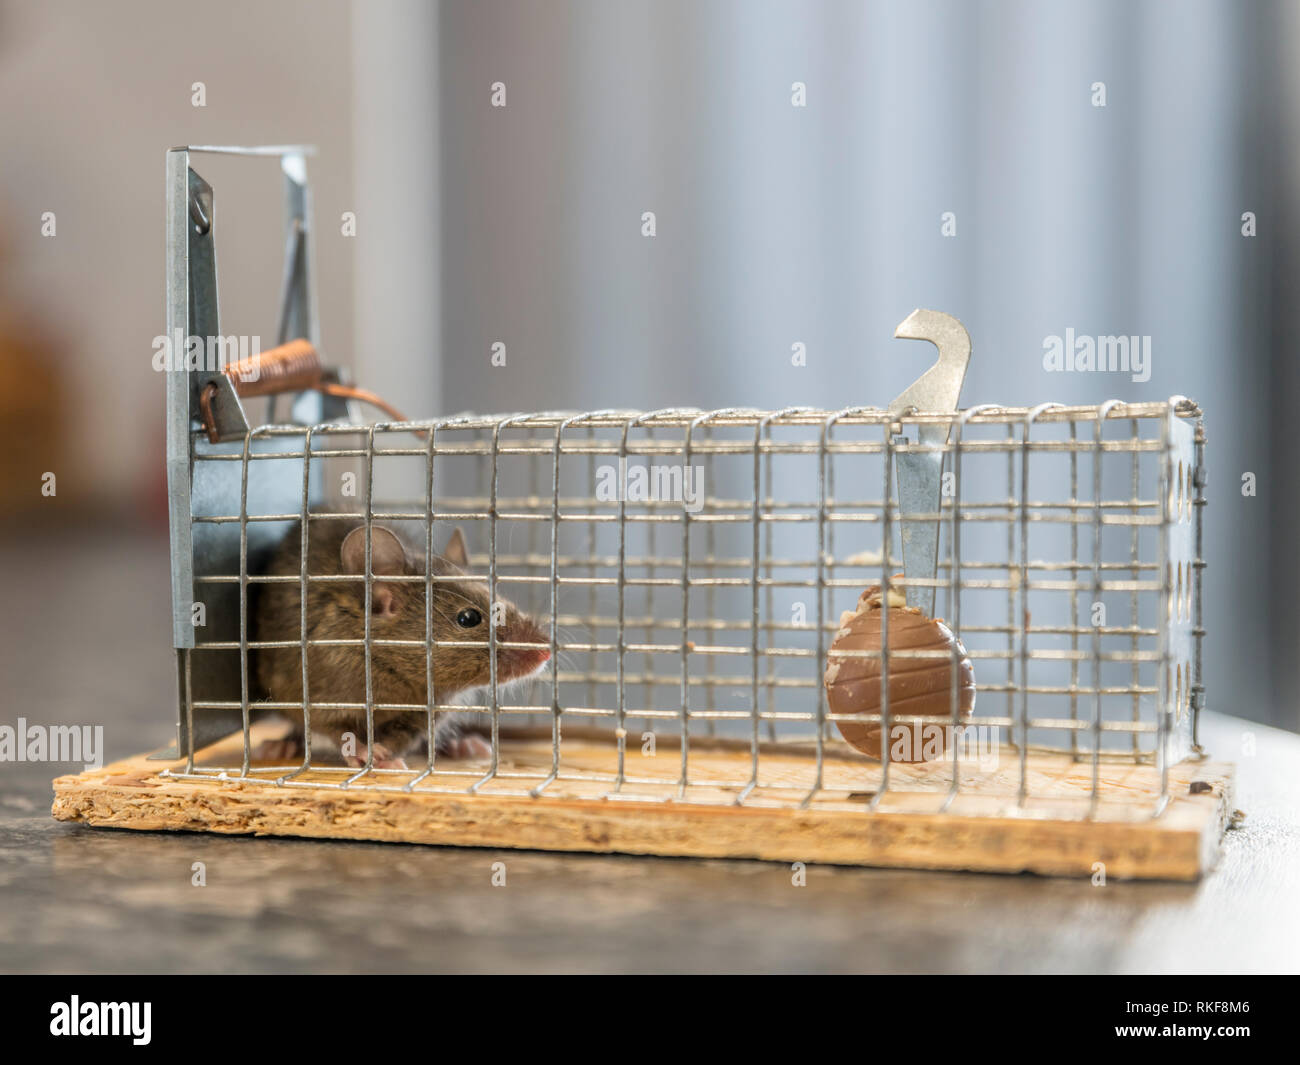 https://c8.alamy.com/comp/RKF8M6/little-mouse-sits-trapped-in-a-wire-trap-against-blurred-background-RKF8M6.jpg